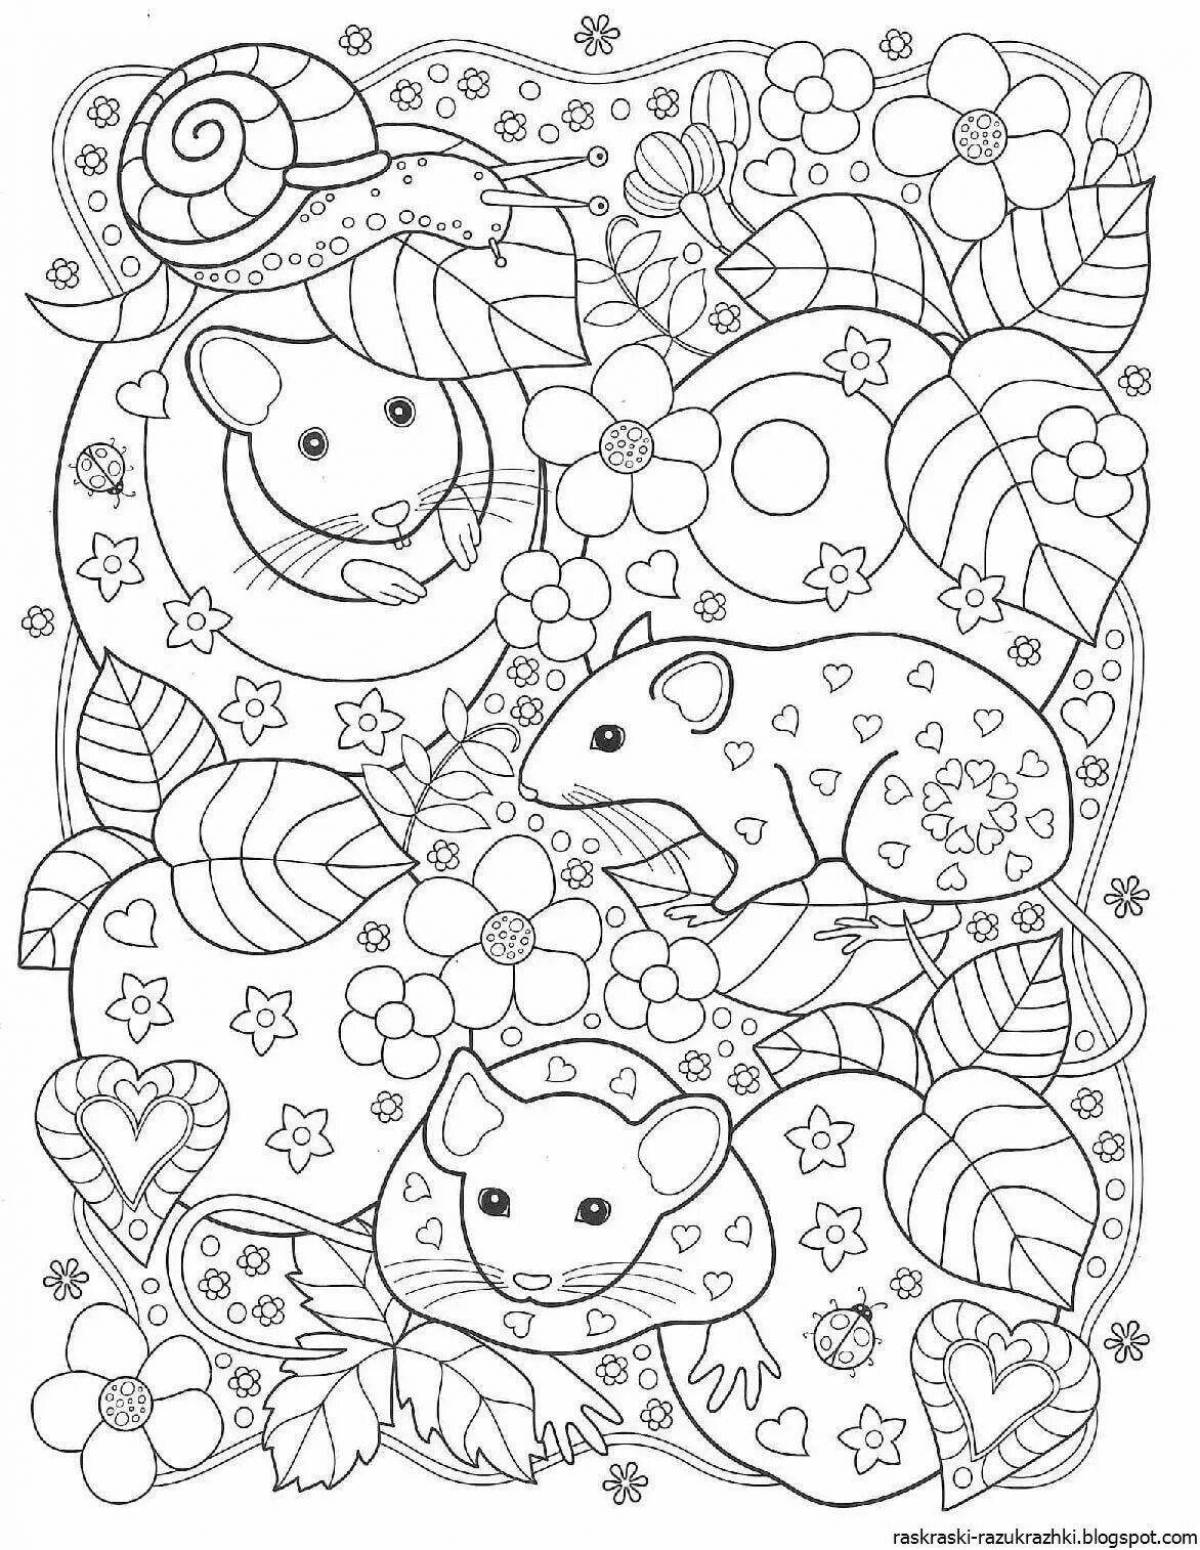 Peaceful anti-stress animal coloring book for kids